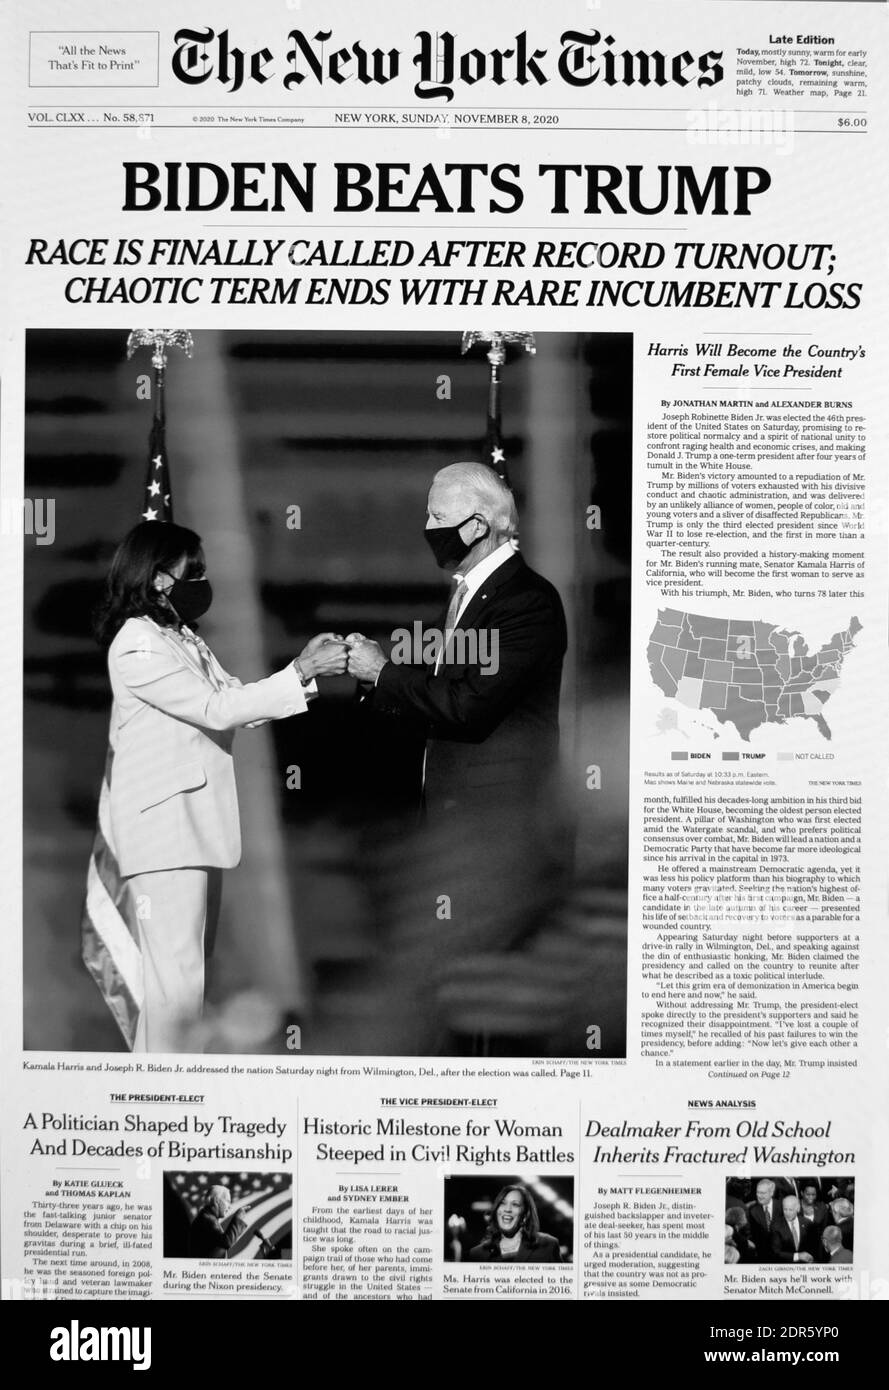 The front page of The New York Times on Sunday, November 8, 2020, with a headline declaring Joe Biden beat Donald Trump in the Presidental election. Stock Photo